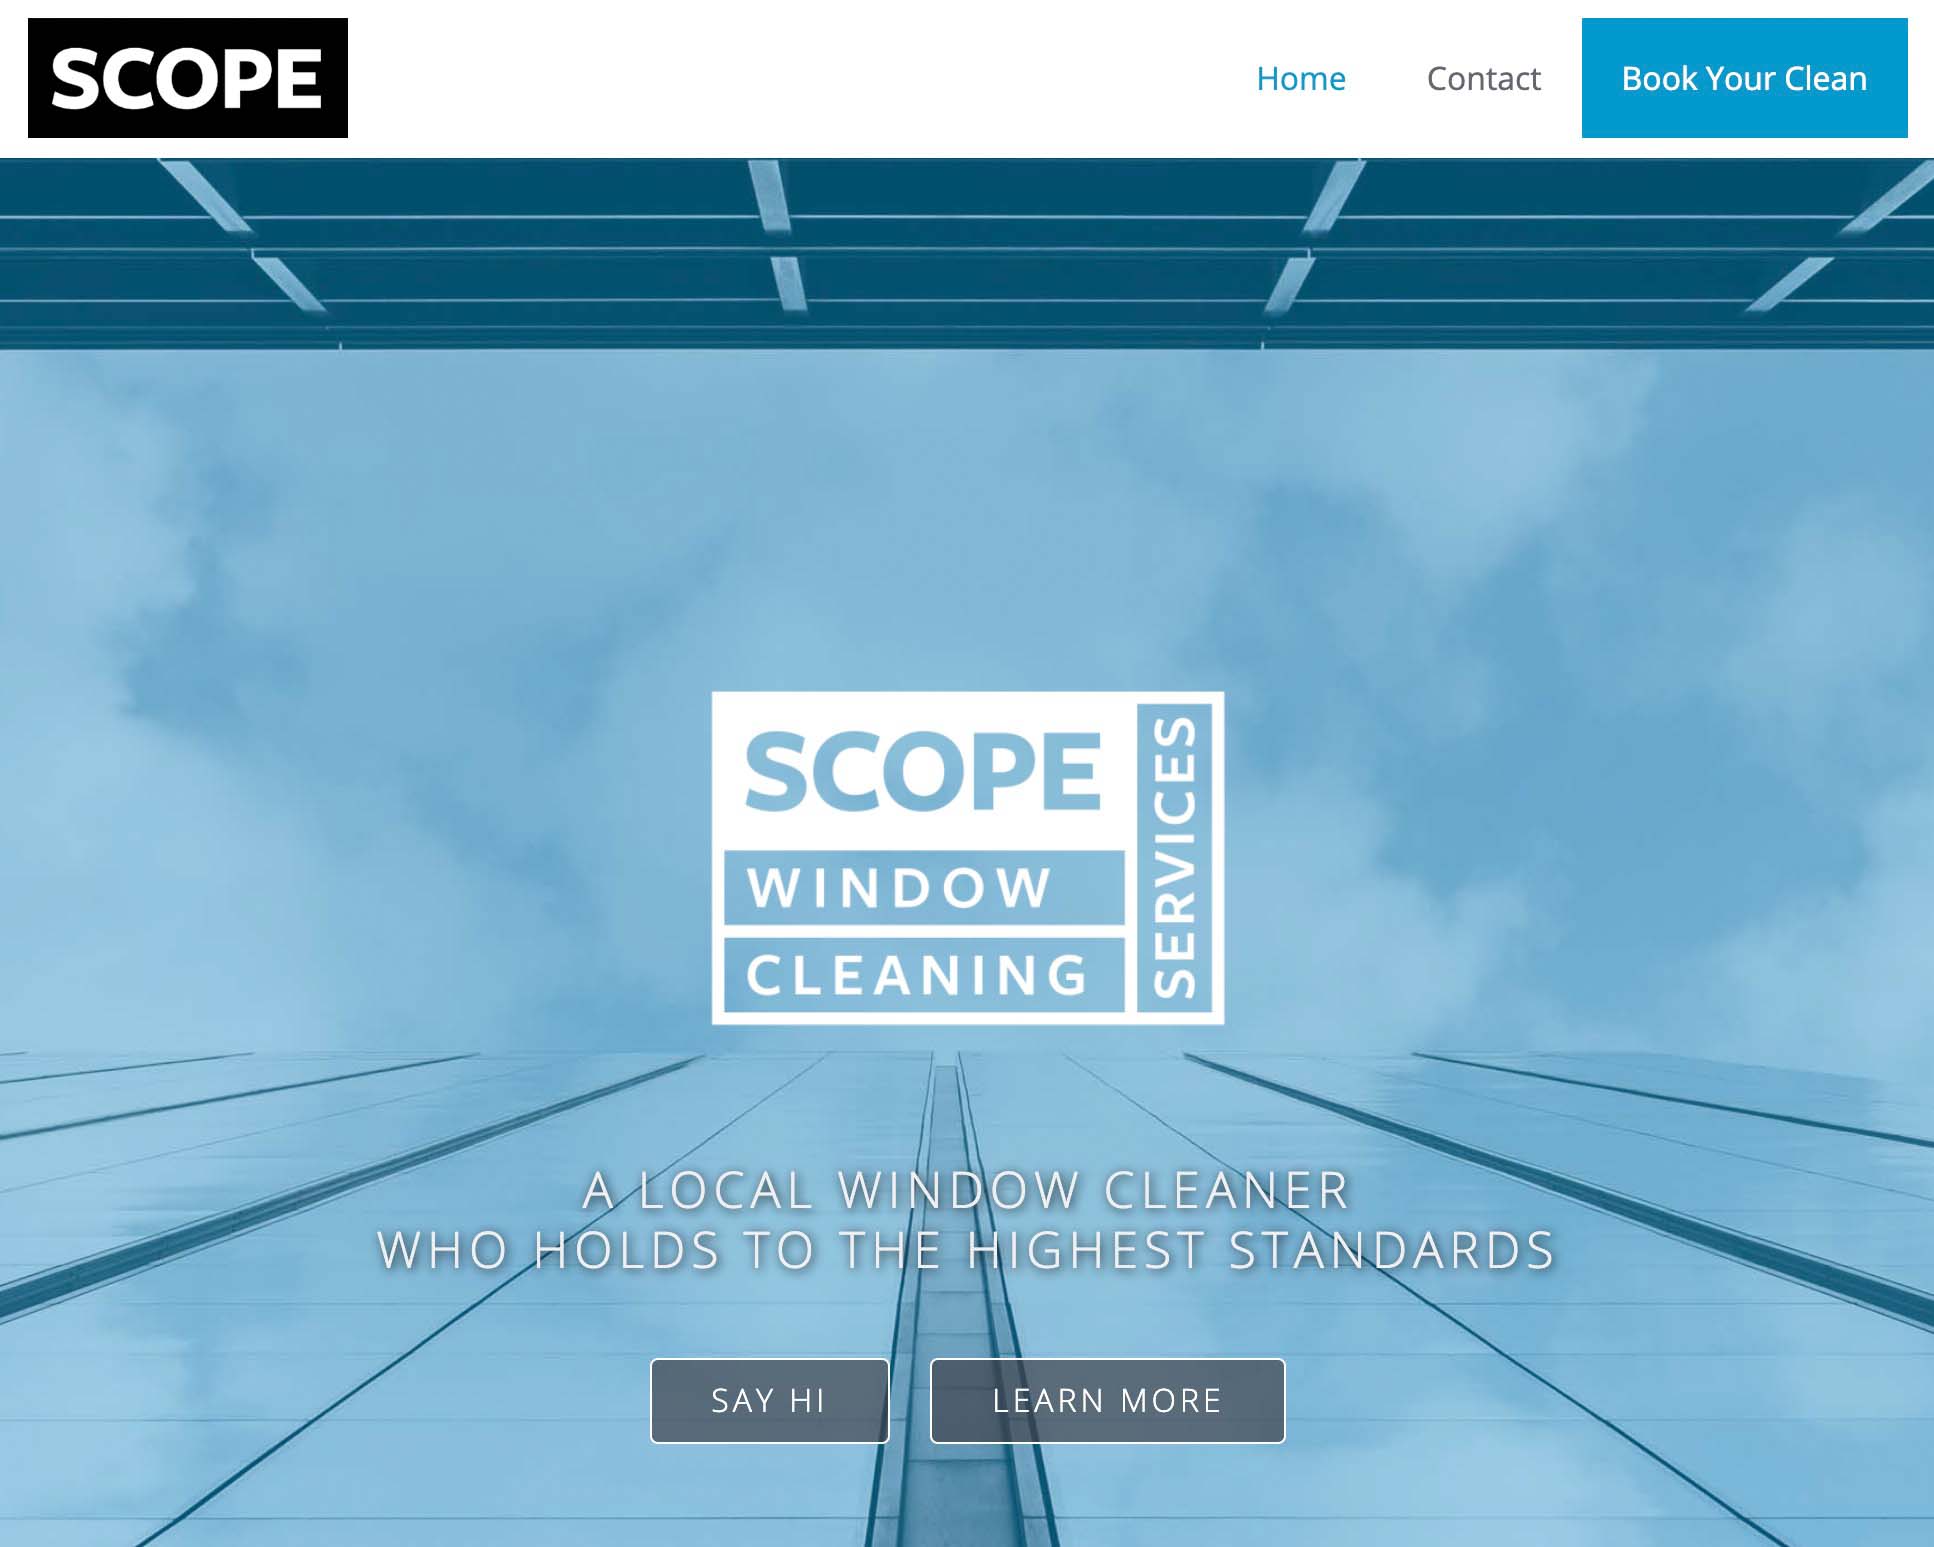 Scope window cleaning services website.